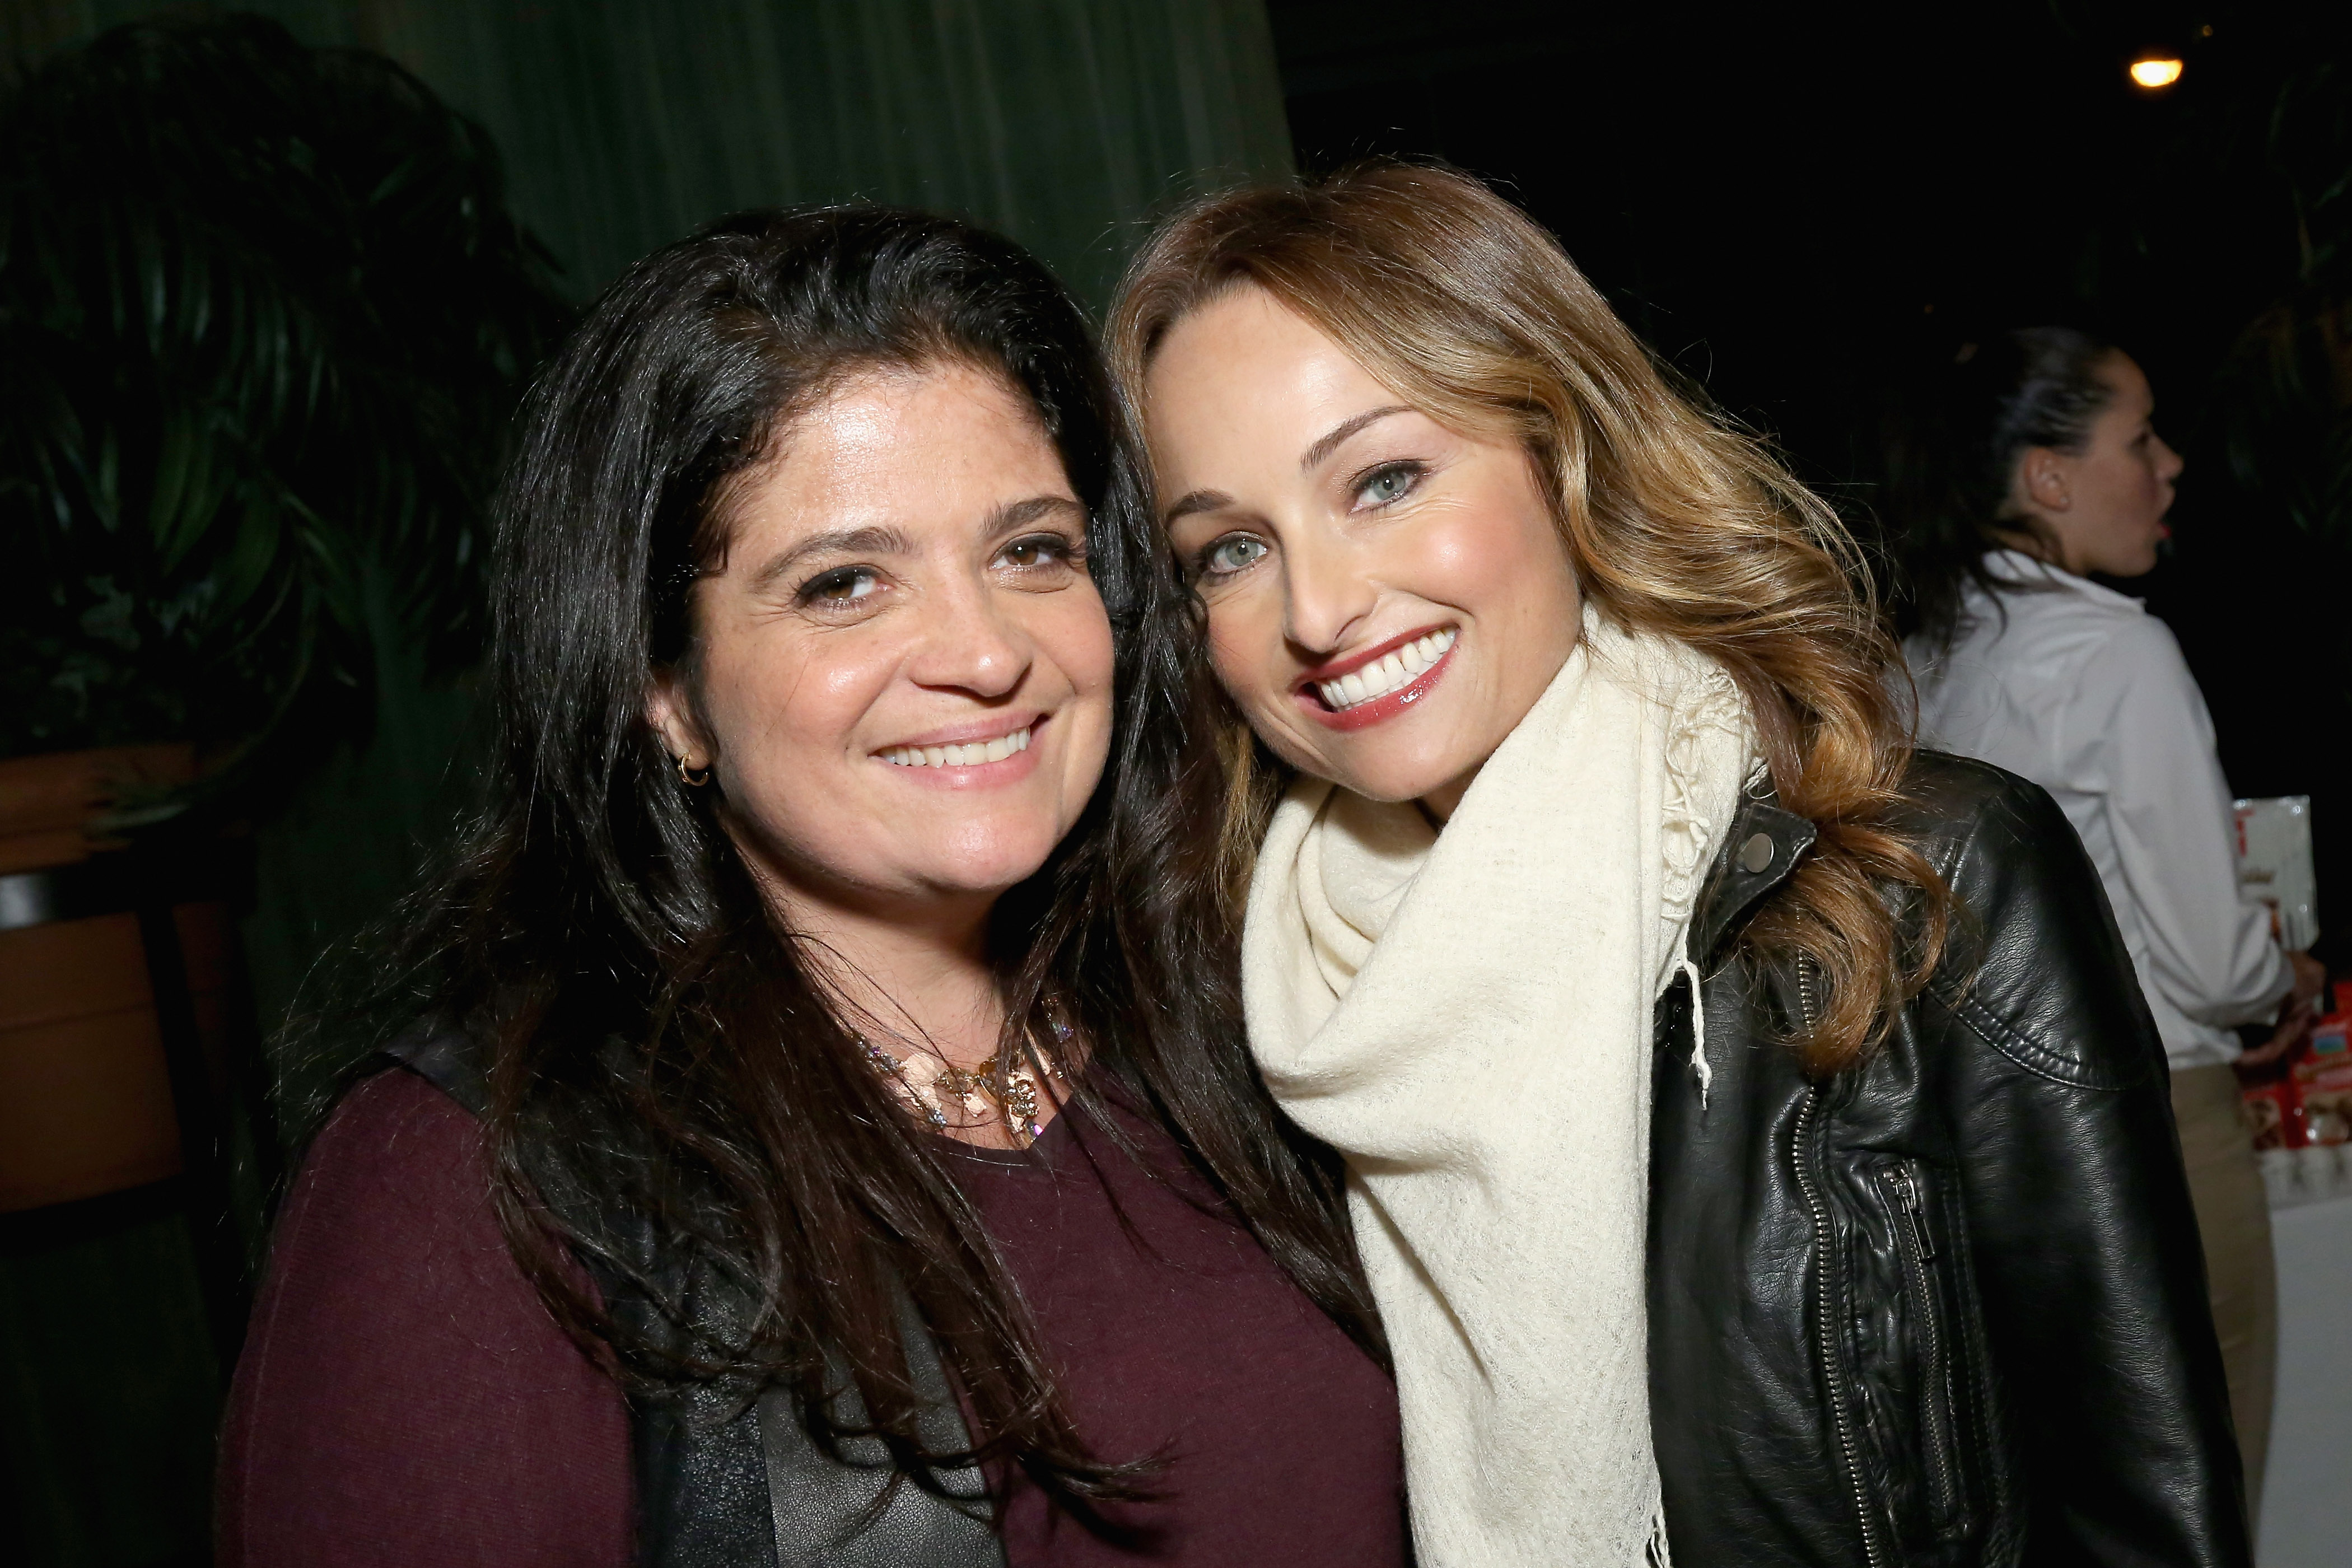 Food Network chefs Alex Guarnaschelli and Giada De Laurentiis smile for a photo during a 2015 Food Network event.